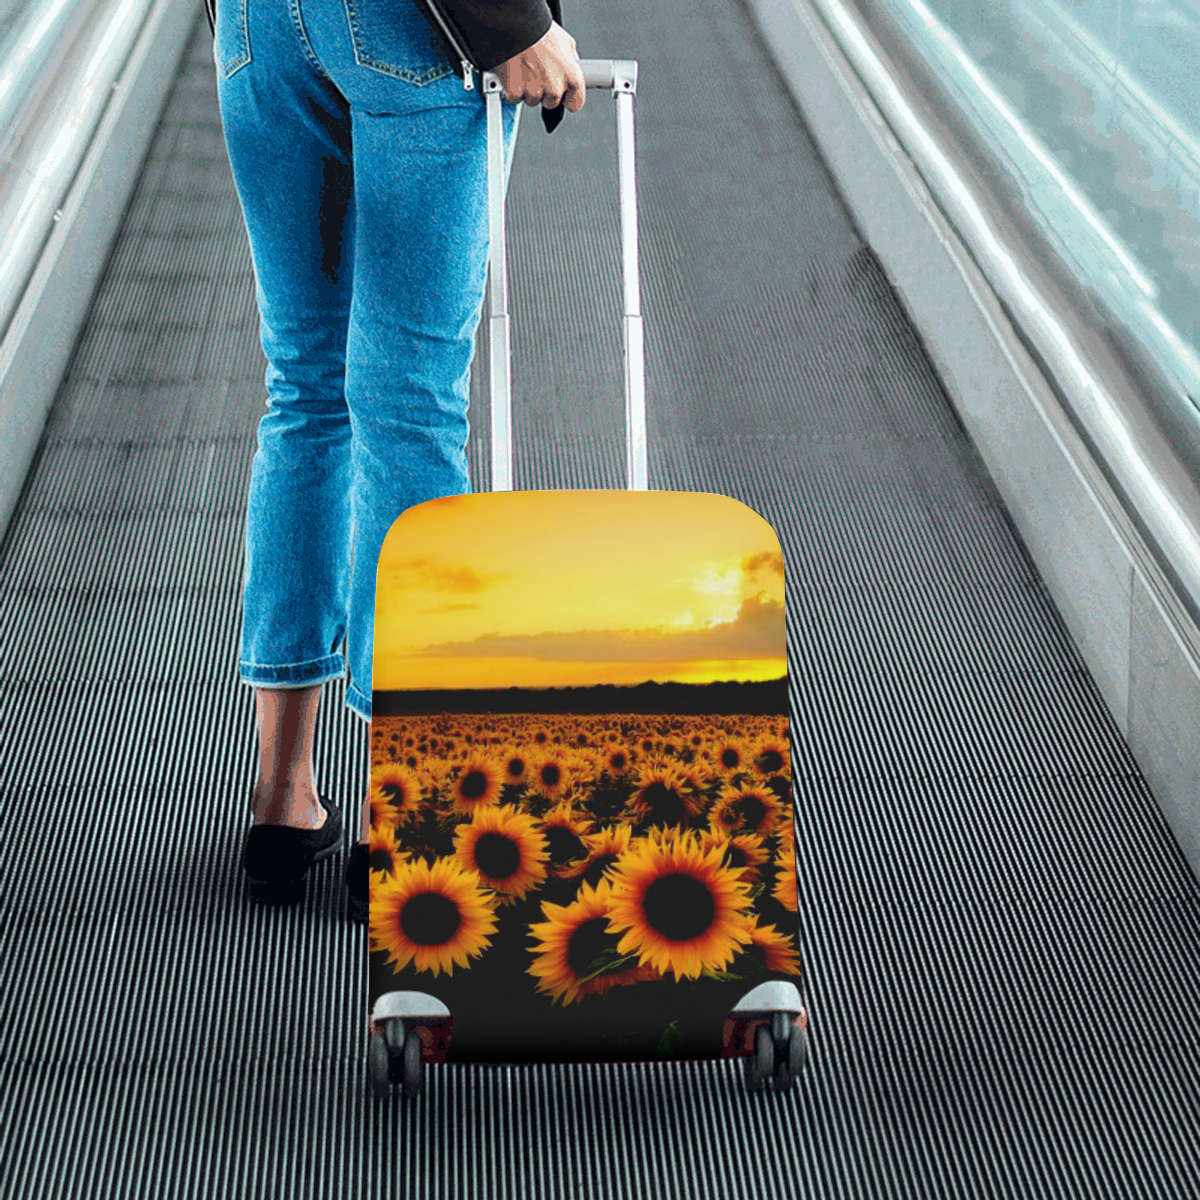 Sunflower Lover Luggage Cover/Small 18"-21"